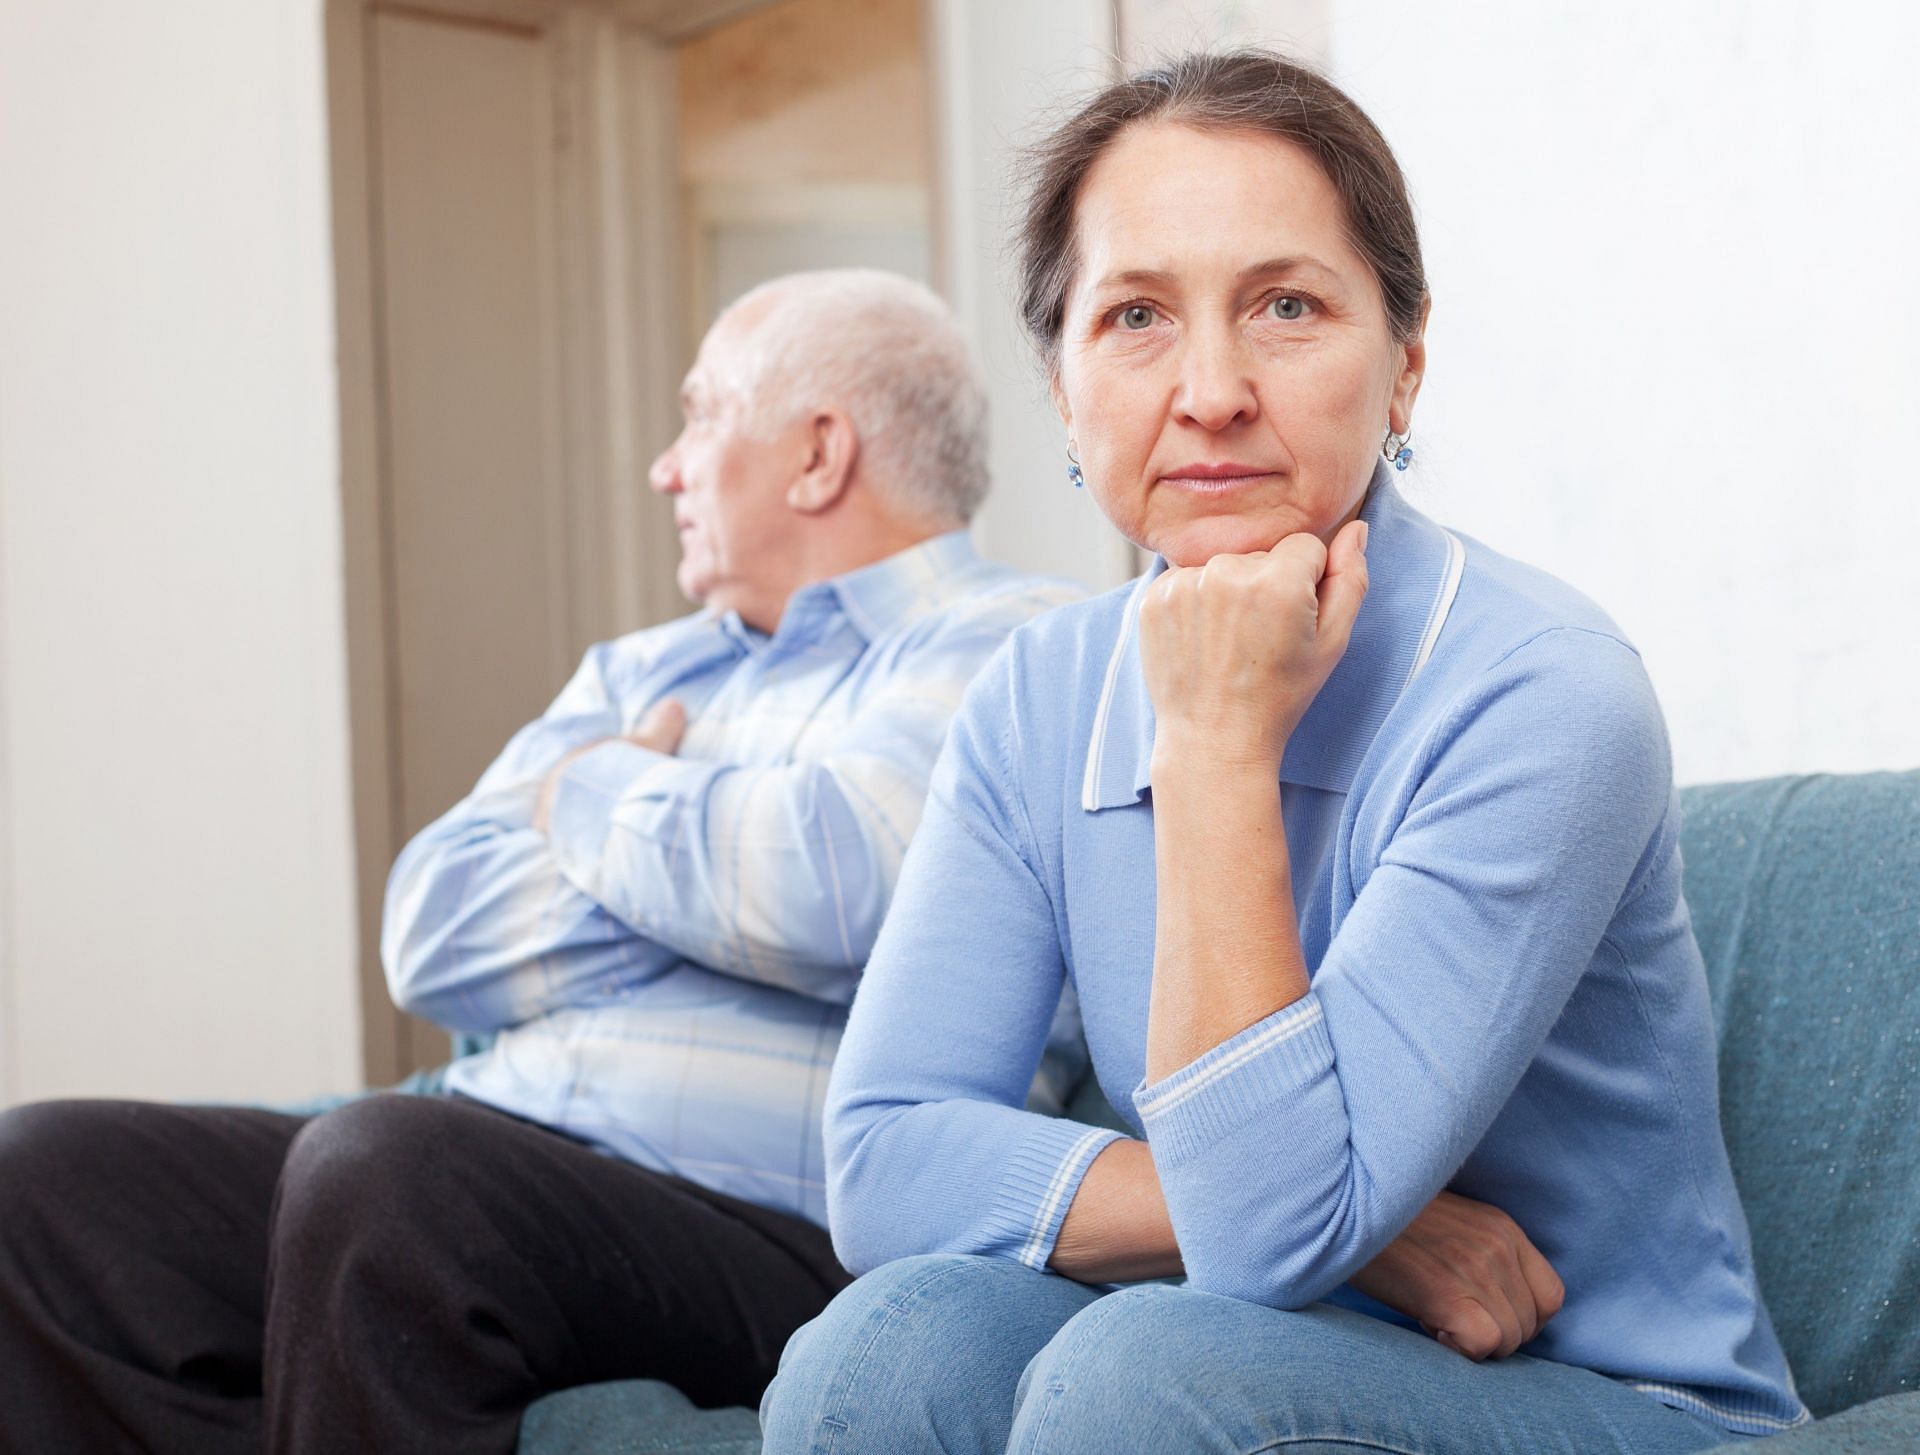 What is gray divorce? and how does it affect elderly mental health? (Image via Freepik/ bearfotos)